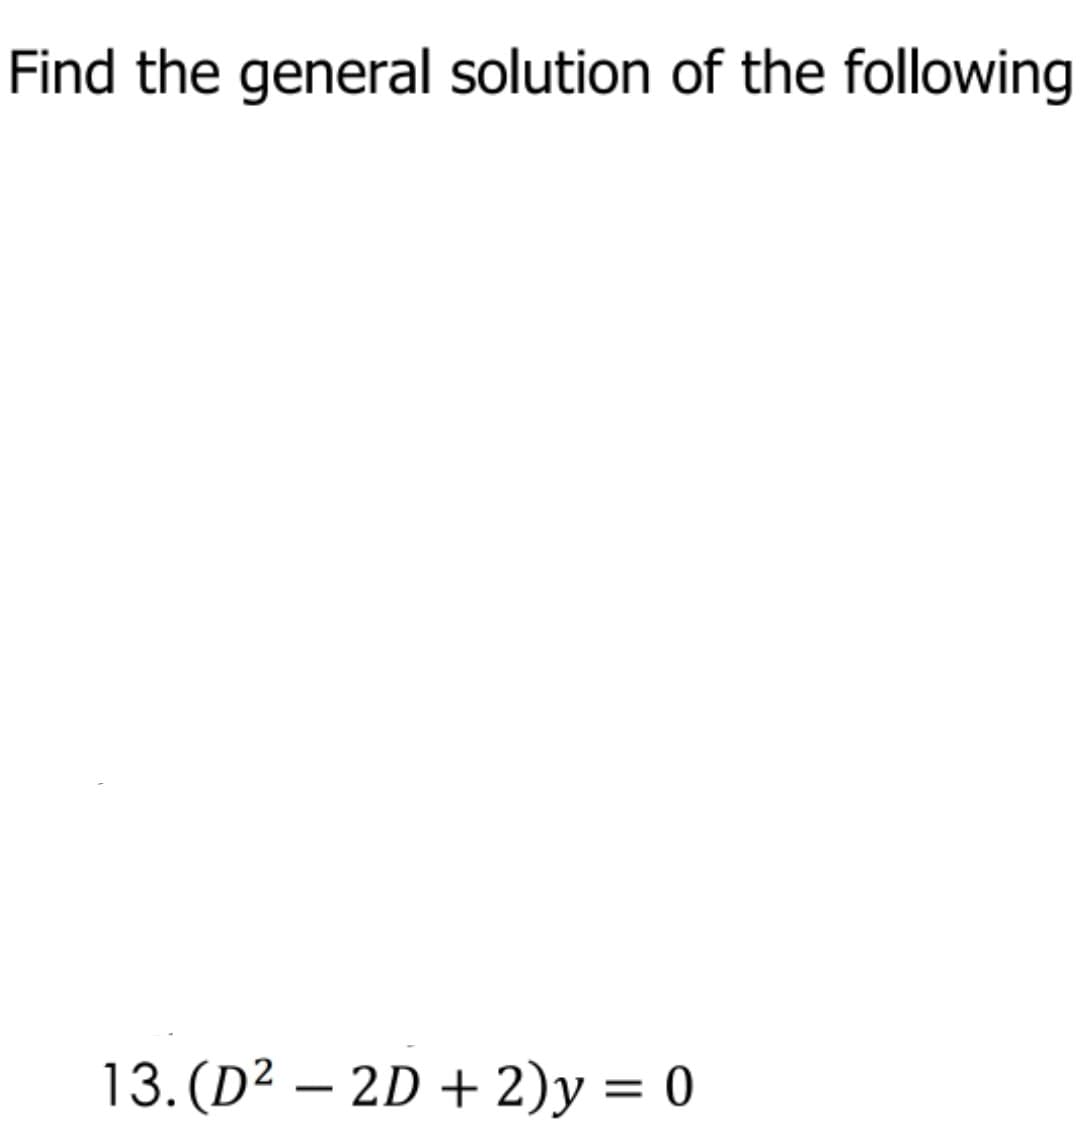 Find the general solution of the following
13. (D² – 2D + 2)y = 0
-
